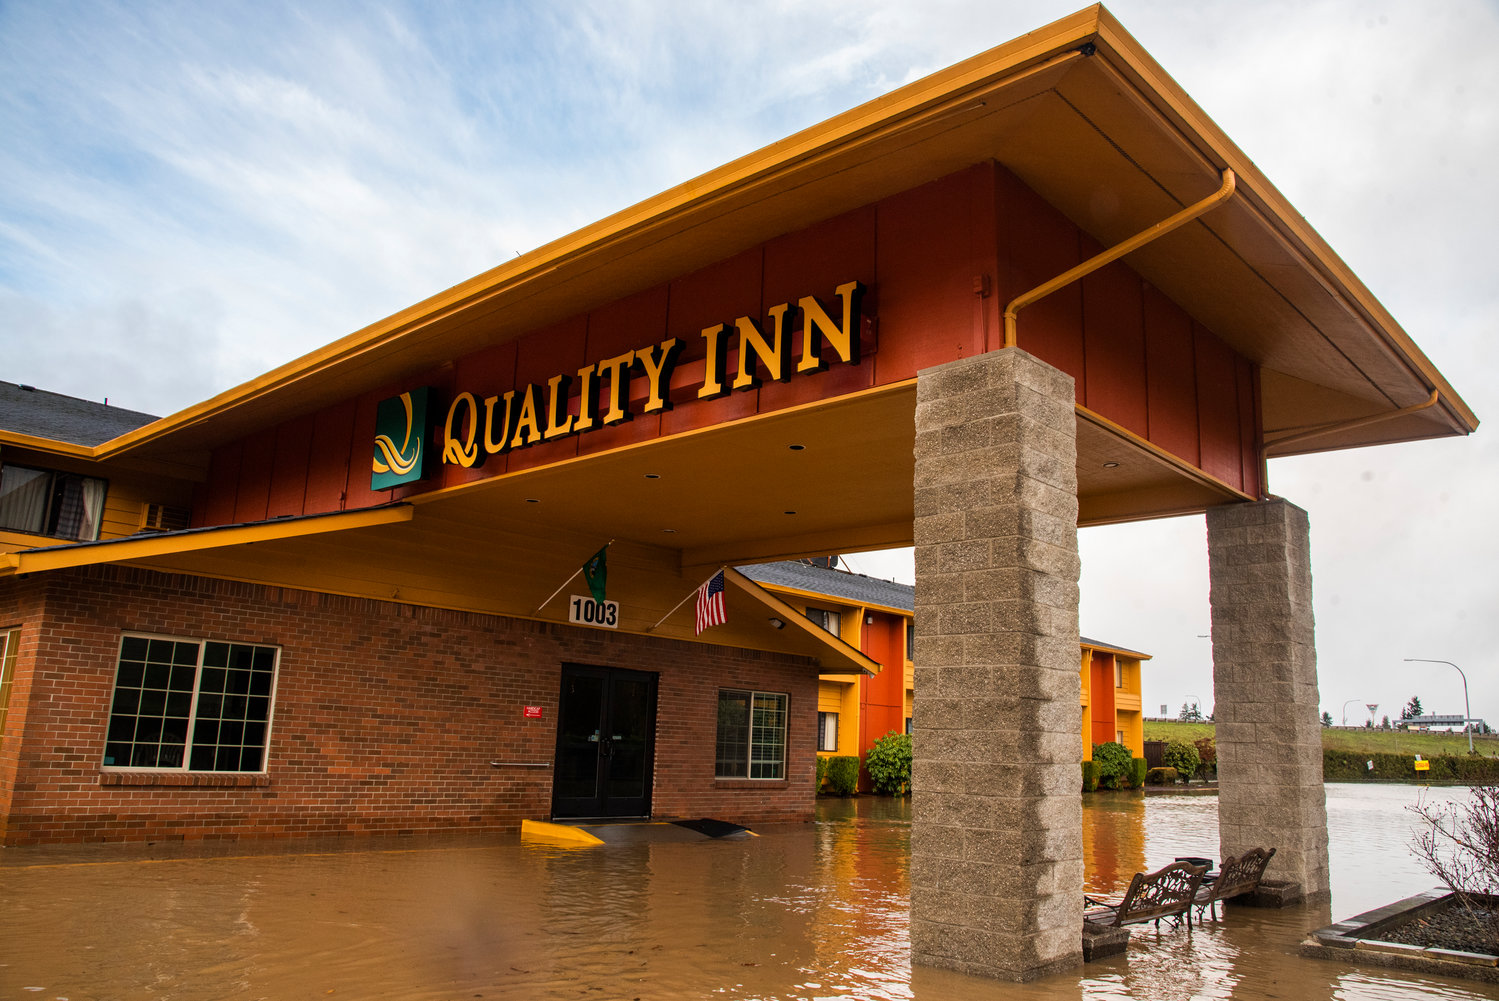 Floodwaters fill the parking lot of Quality Inn located along 1003 Eckerson Road in Centralia.